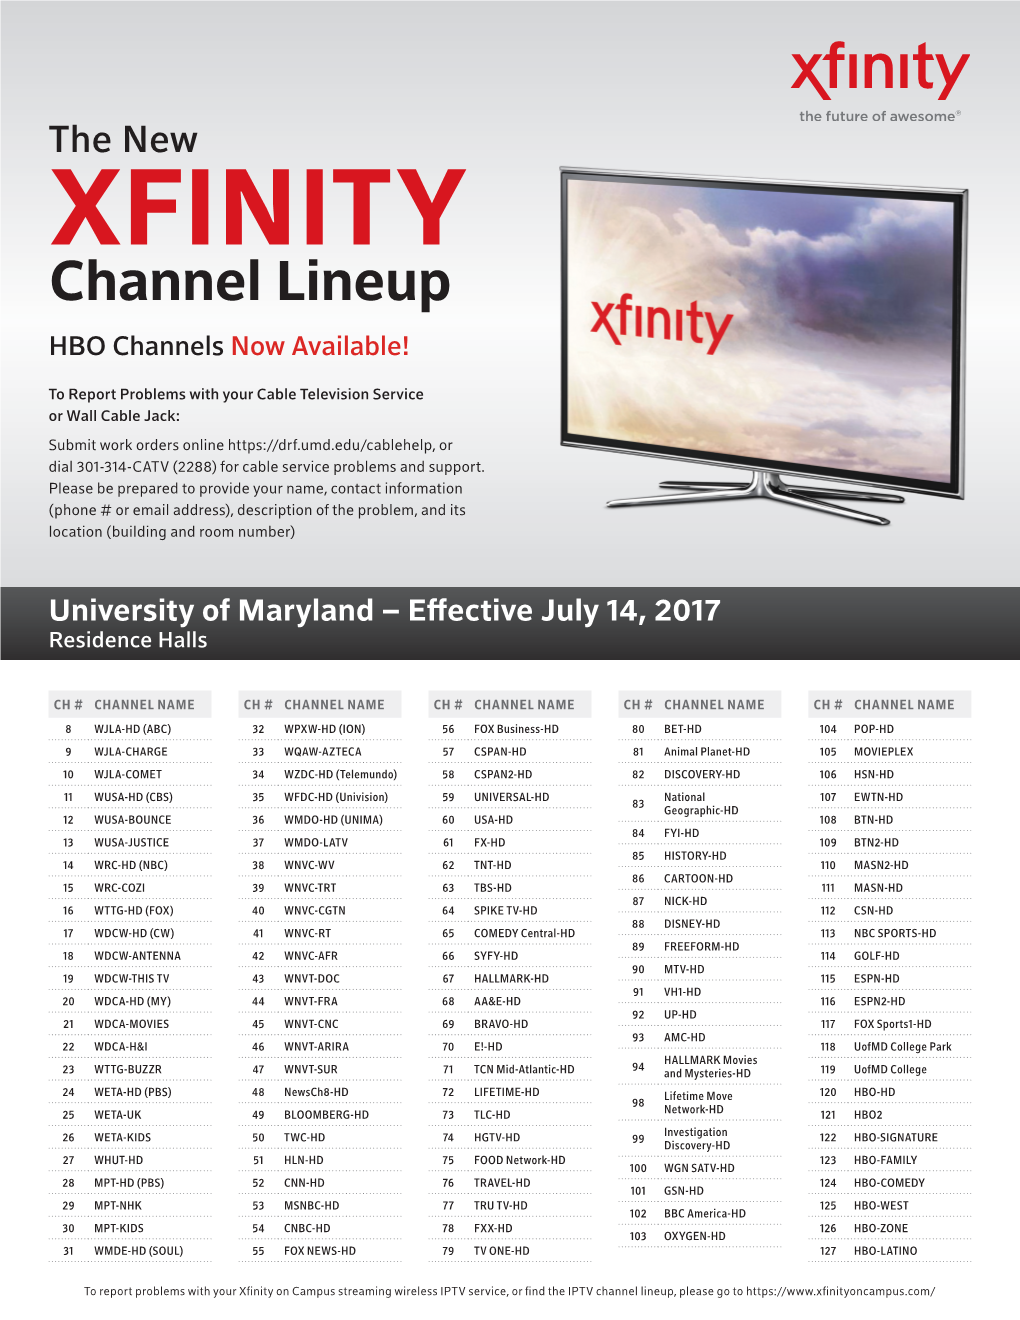 XFINITY Channel Lineup HBO Channels Now Available! DocsLib